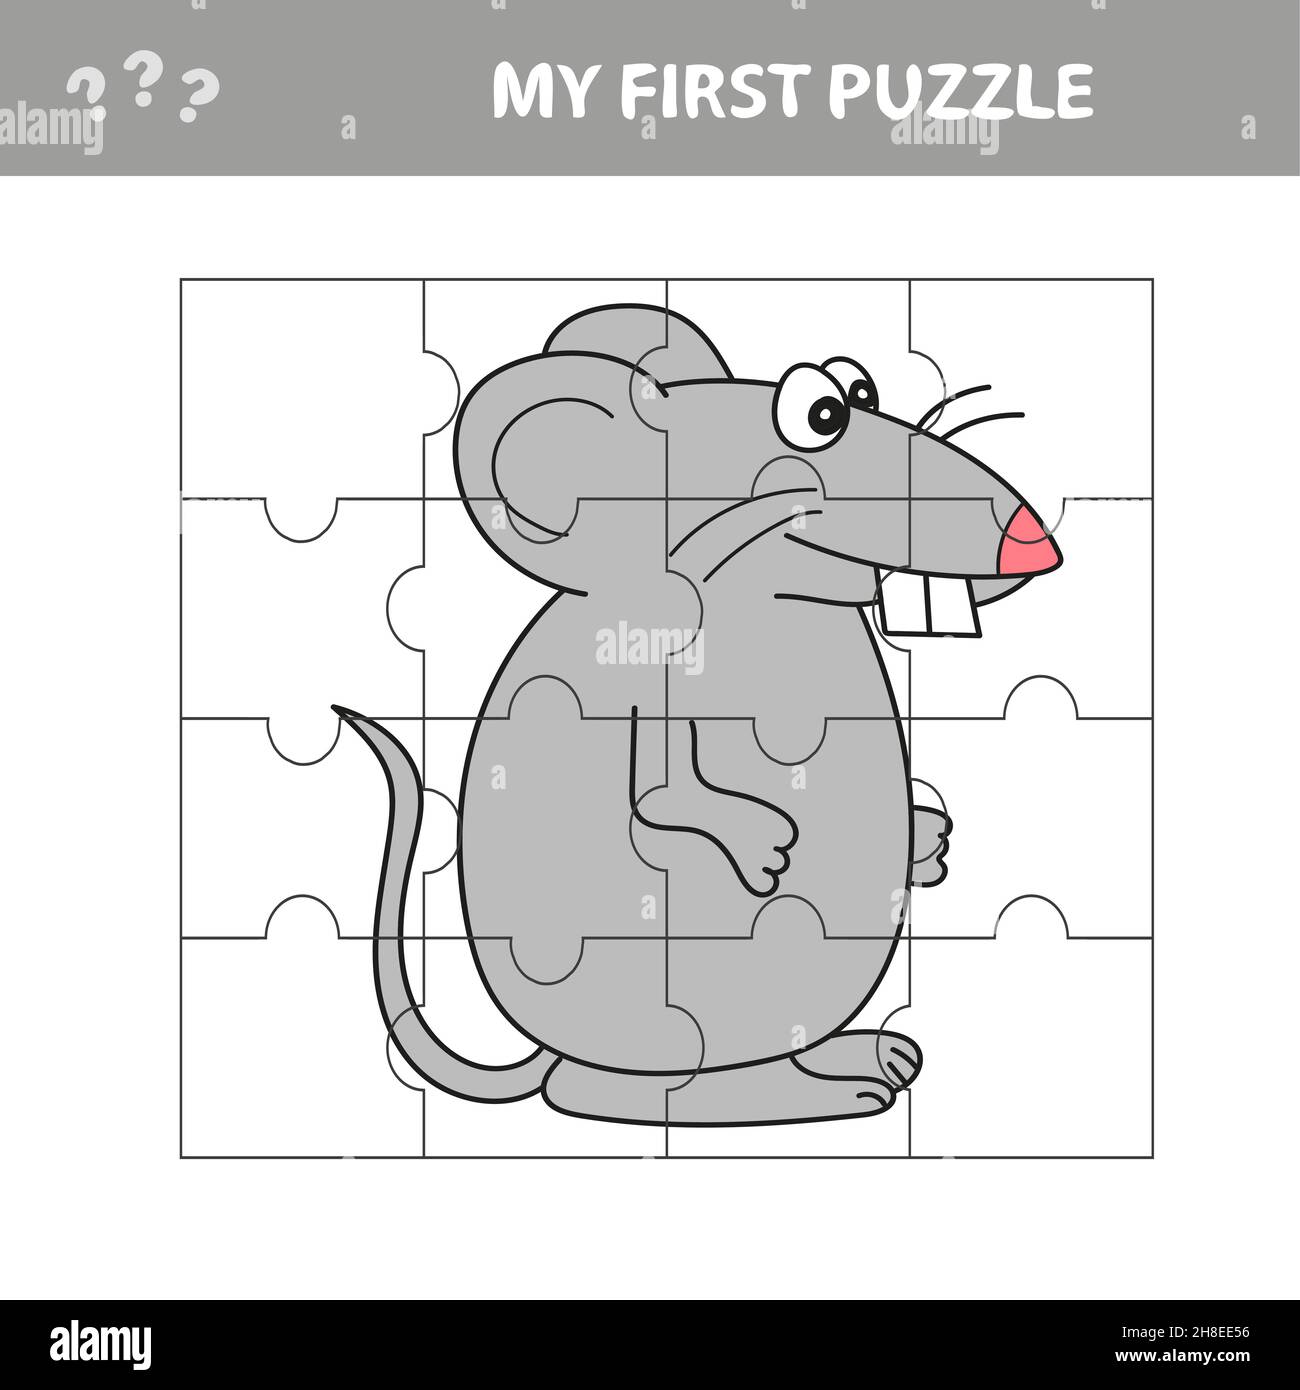 FREE puzzles for preschool kids! Practice basic mouse skills and